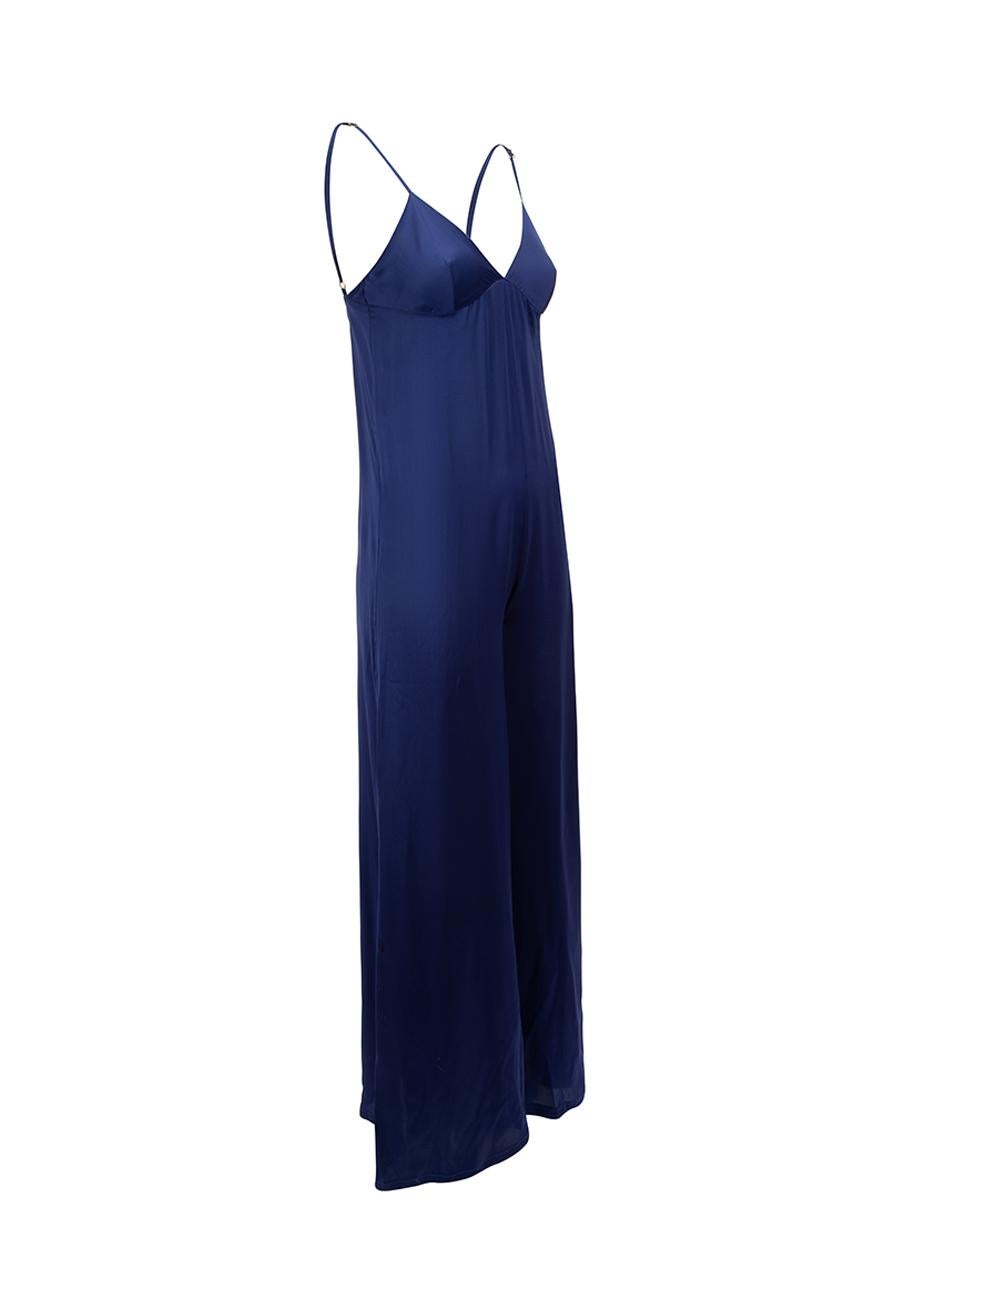 CONDITION is Very good. Minimal wear to jumpsuit is evident. Minimal wear to the right-side under the bust with fine pulls to the weave of the satin, dark marks to the rear right leg on this used Stella McCartney designer resale